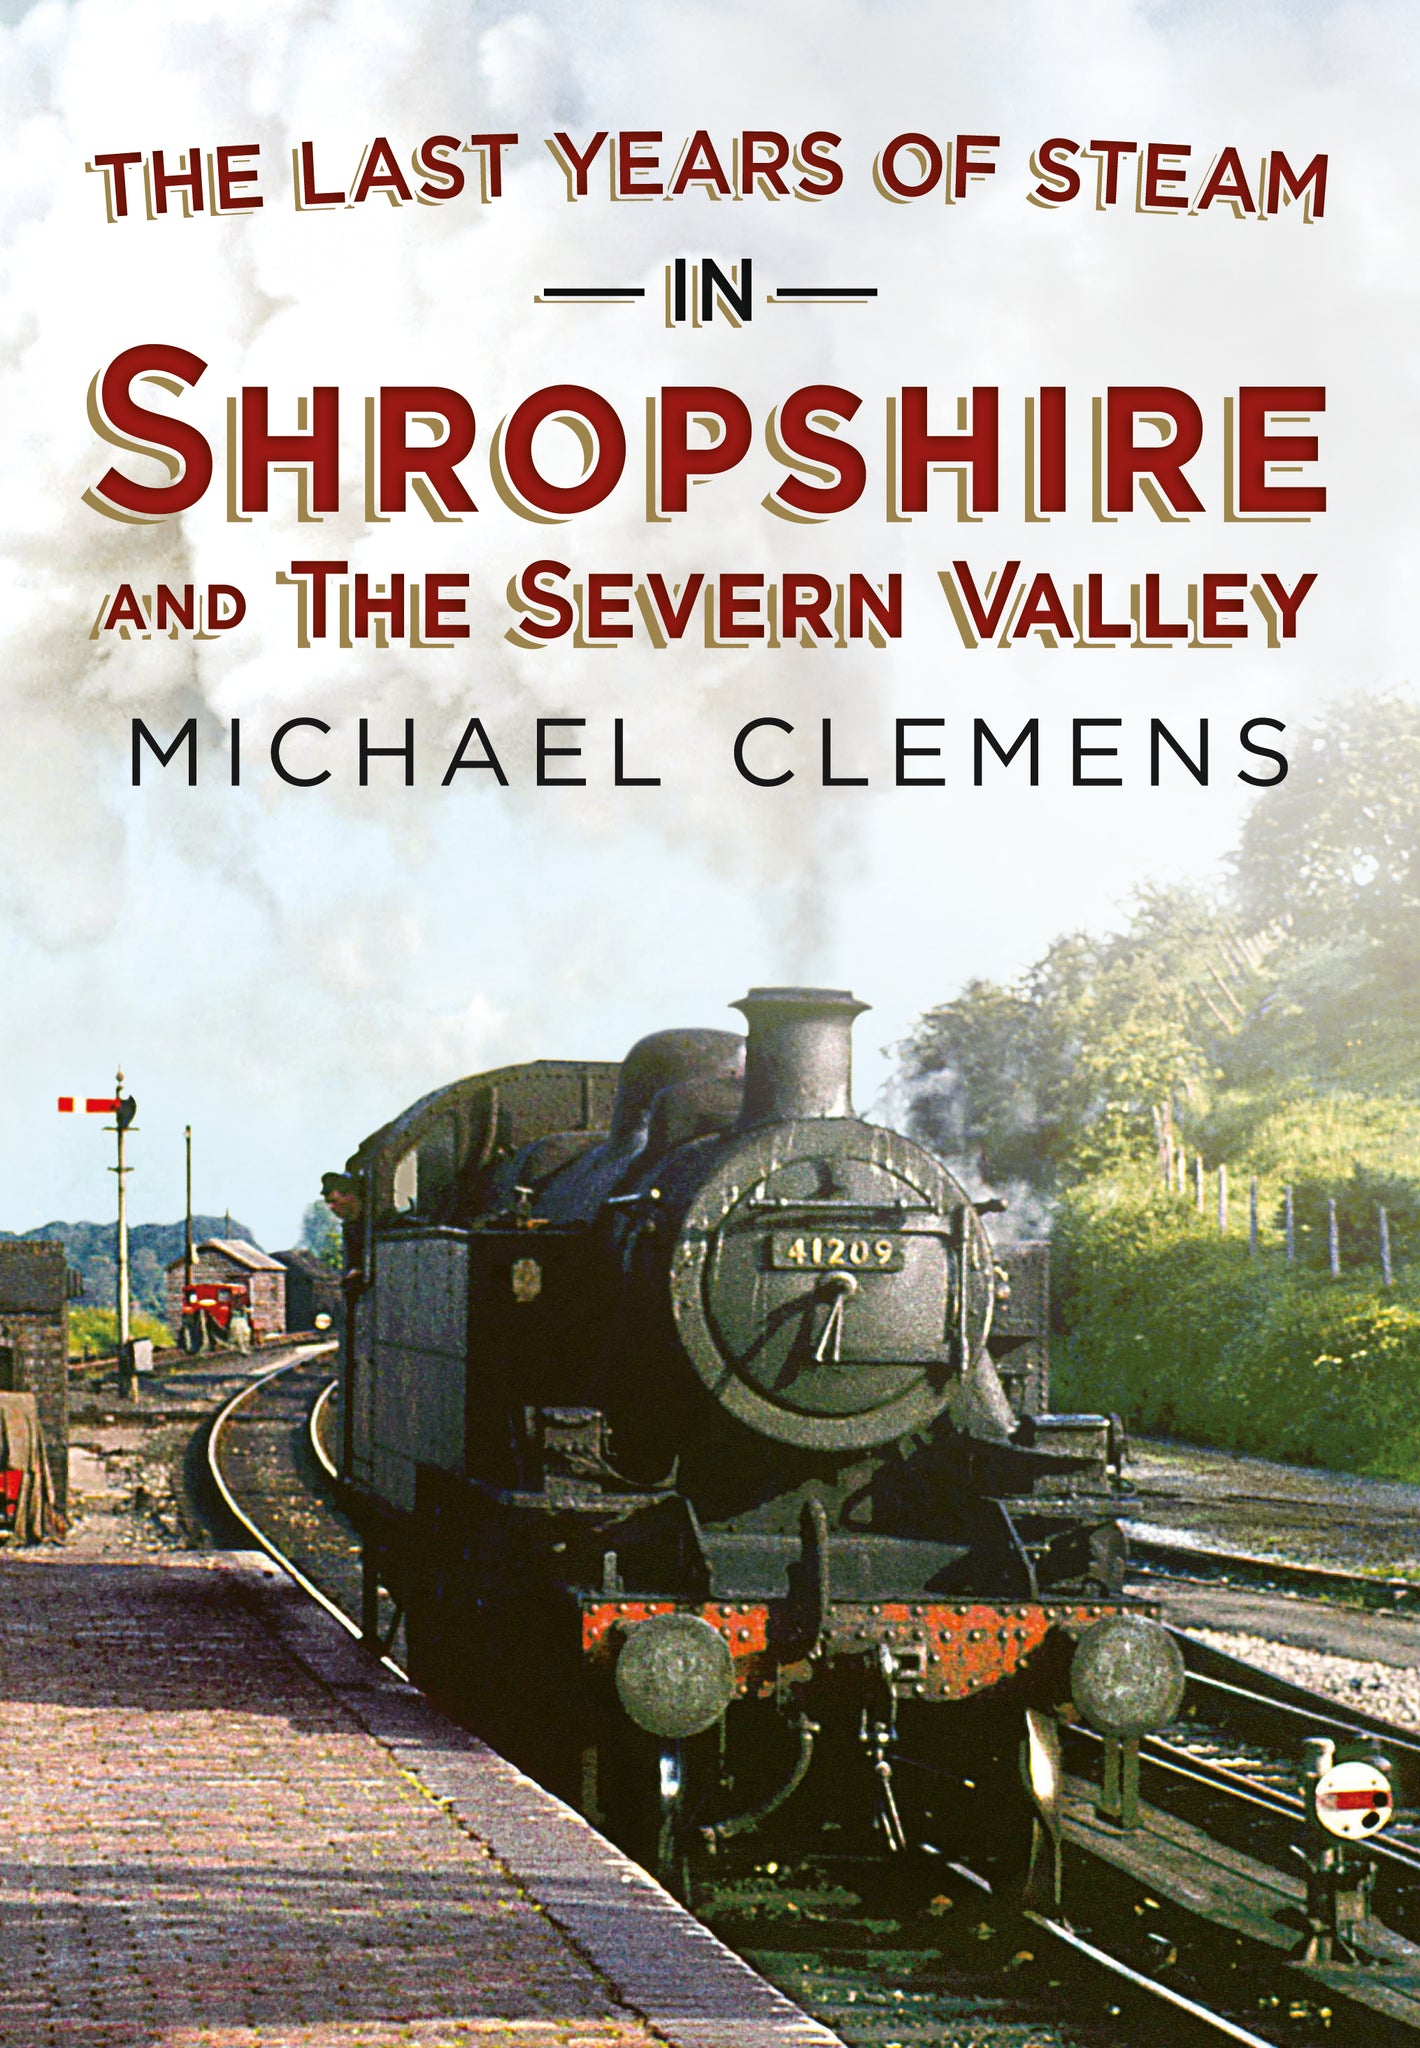 The Last Years of Steam in Shropshire and the Severn Valley (paperback edition)